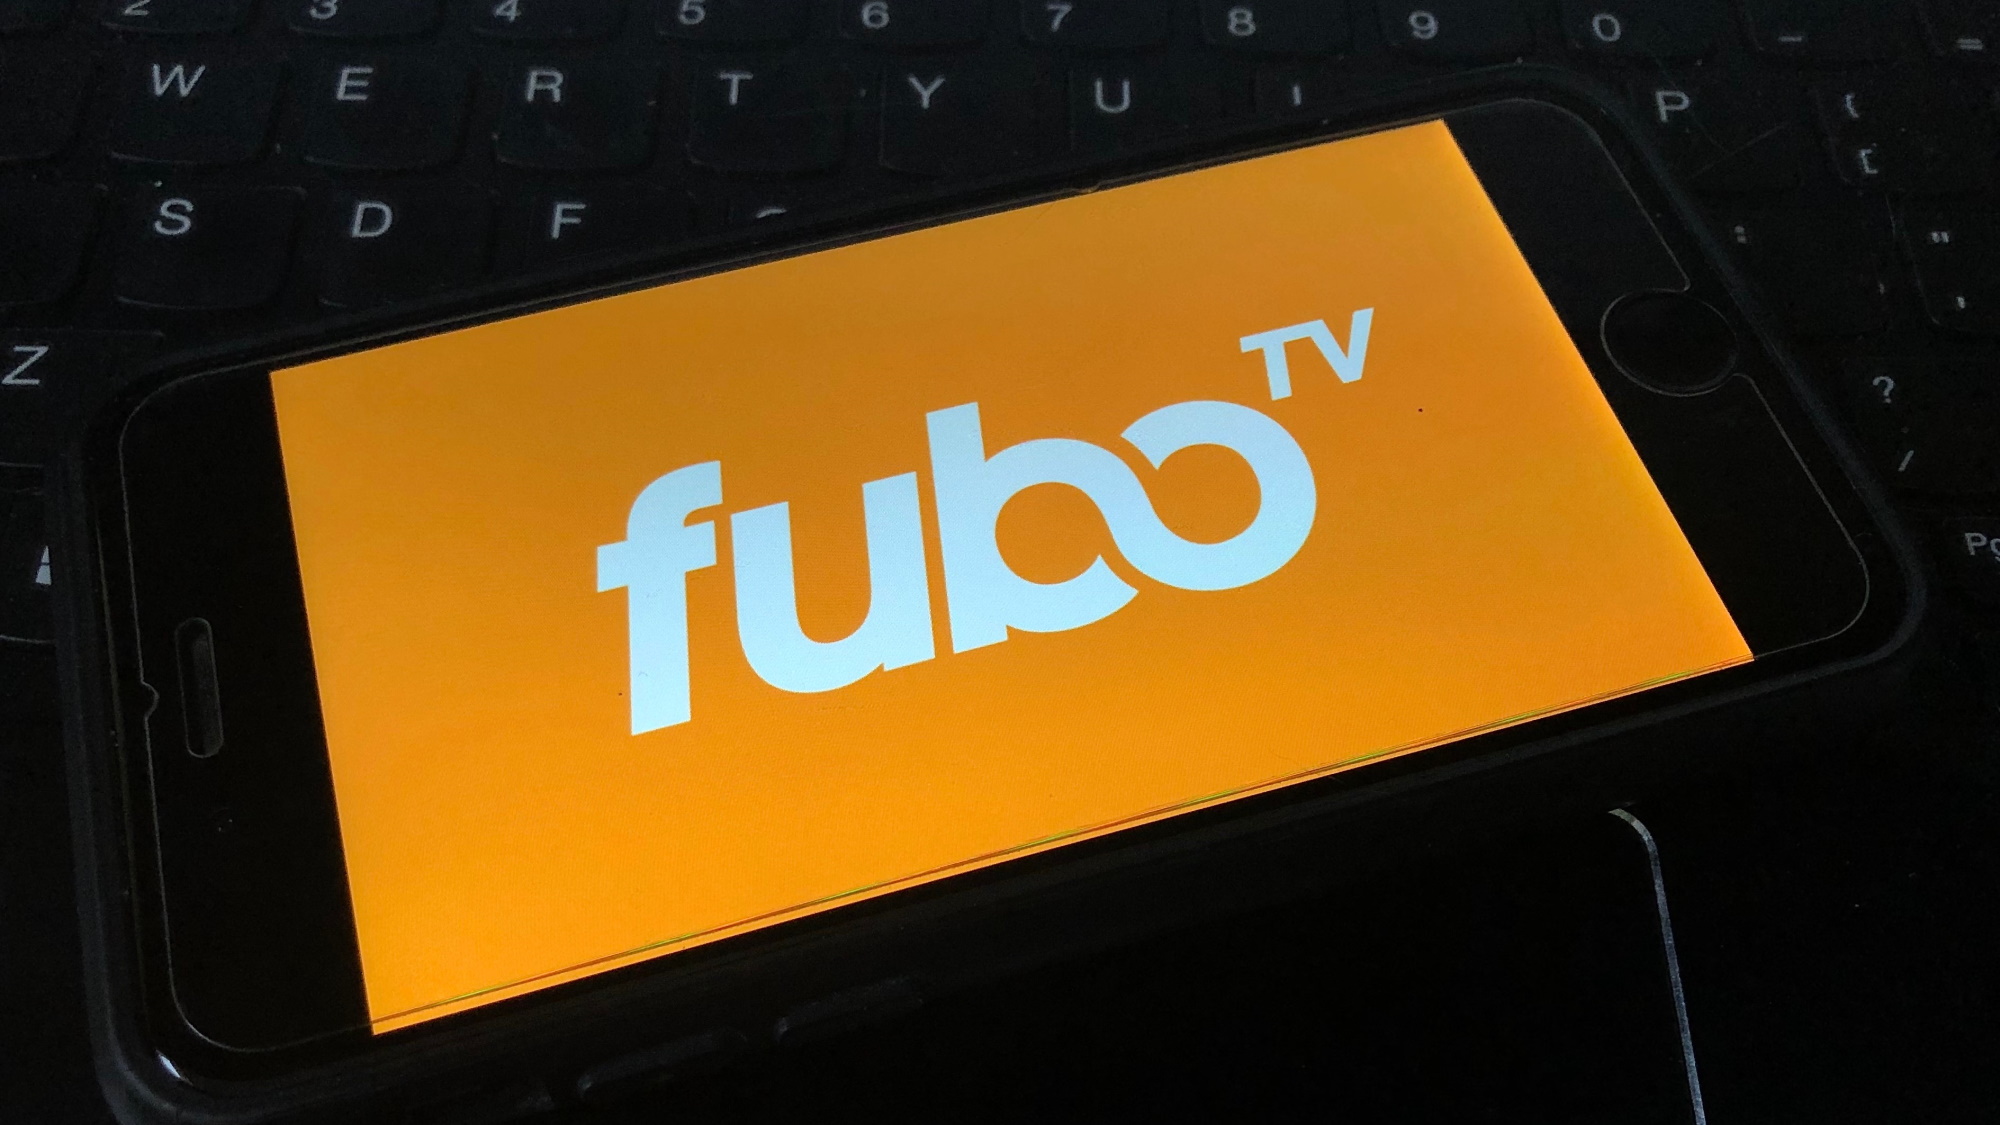 Is Fubo Tv Provide Sports Channels ?, by Streaming Services